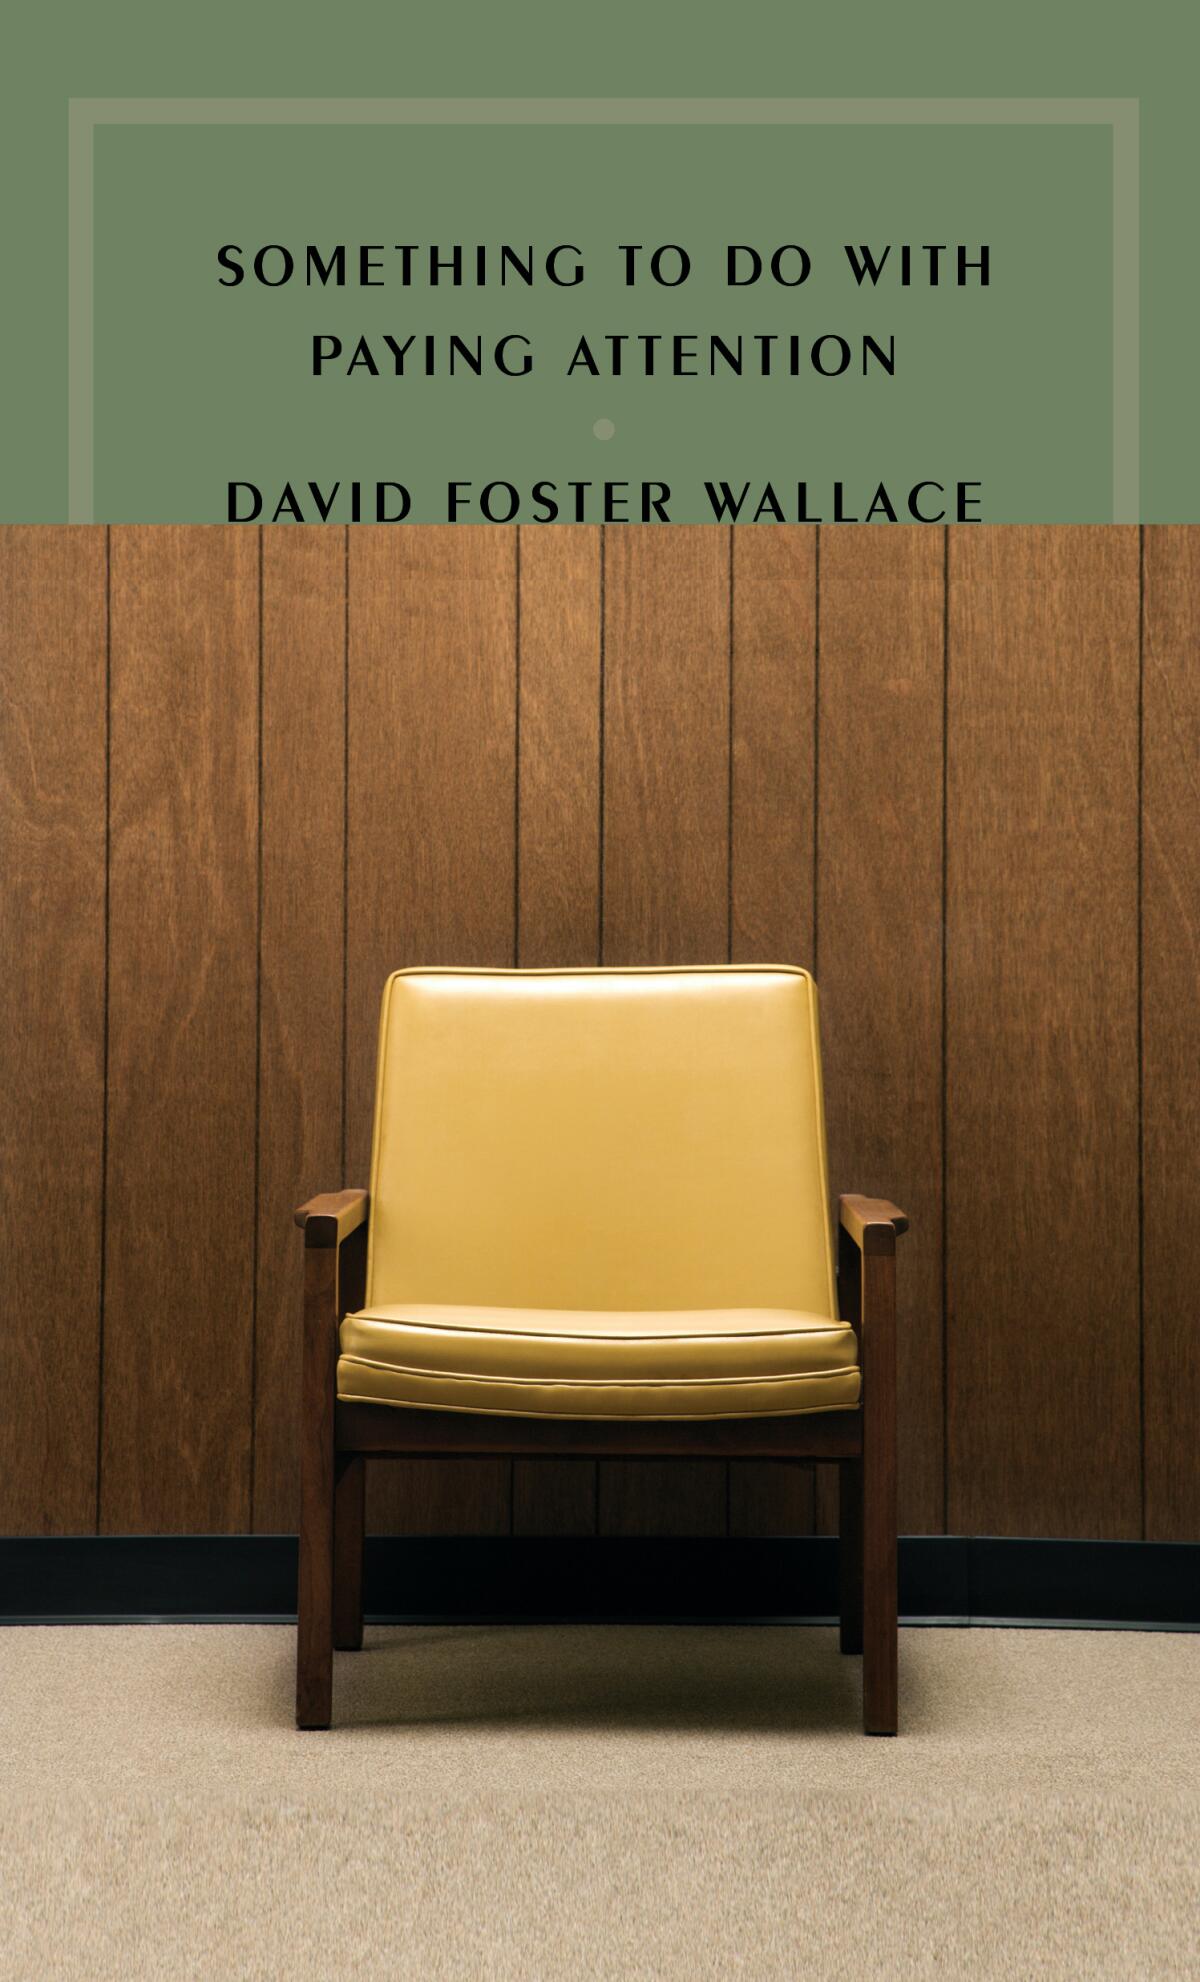 the cover of "Something to Do With Paying Attention" by David Foster Wallace